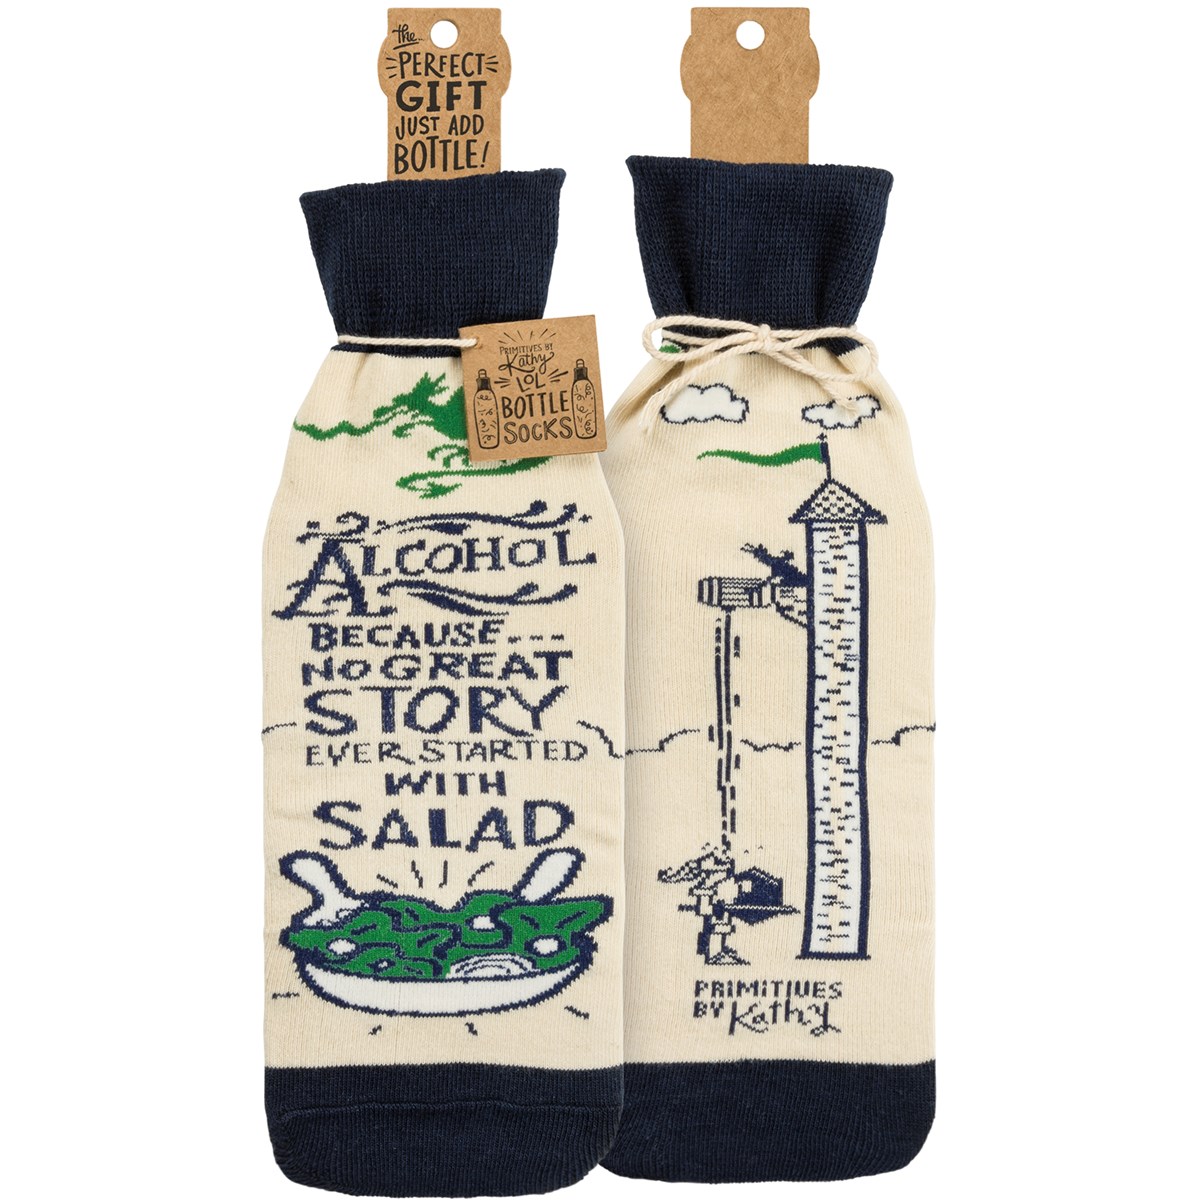 No Good Story Started With Salad Bottle Sock - Cotton, Nylon, Spandex